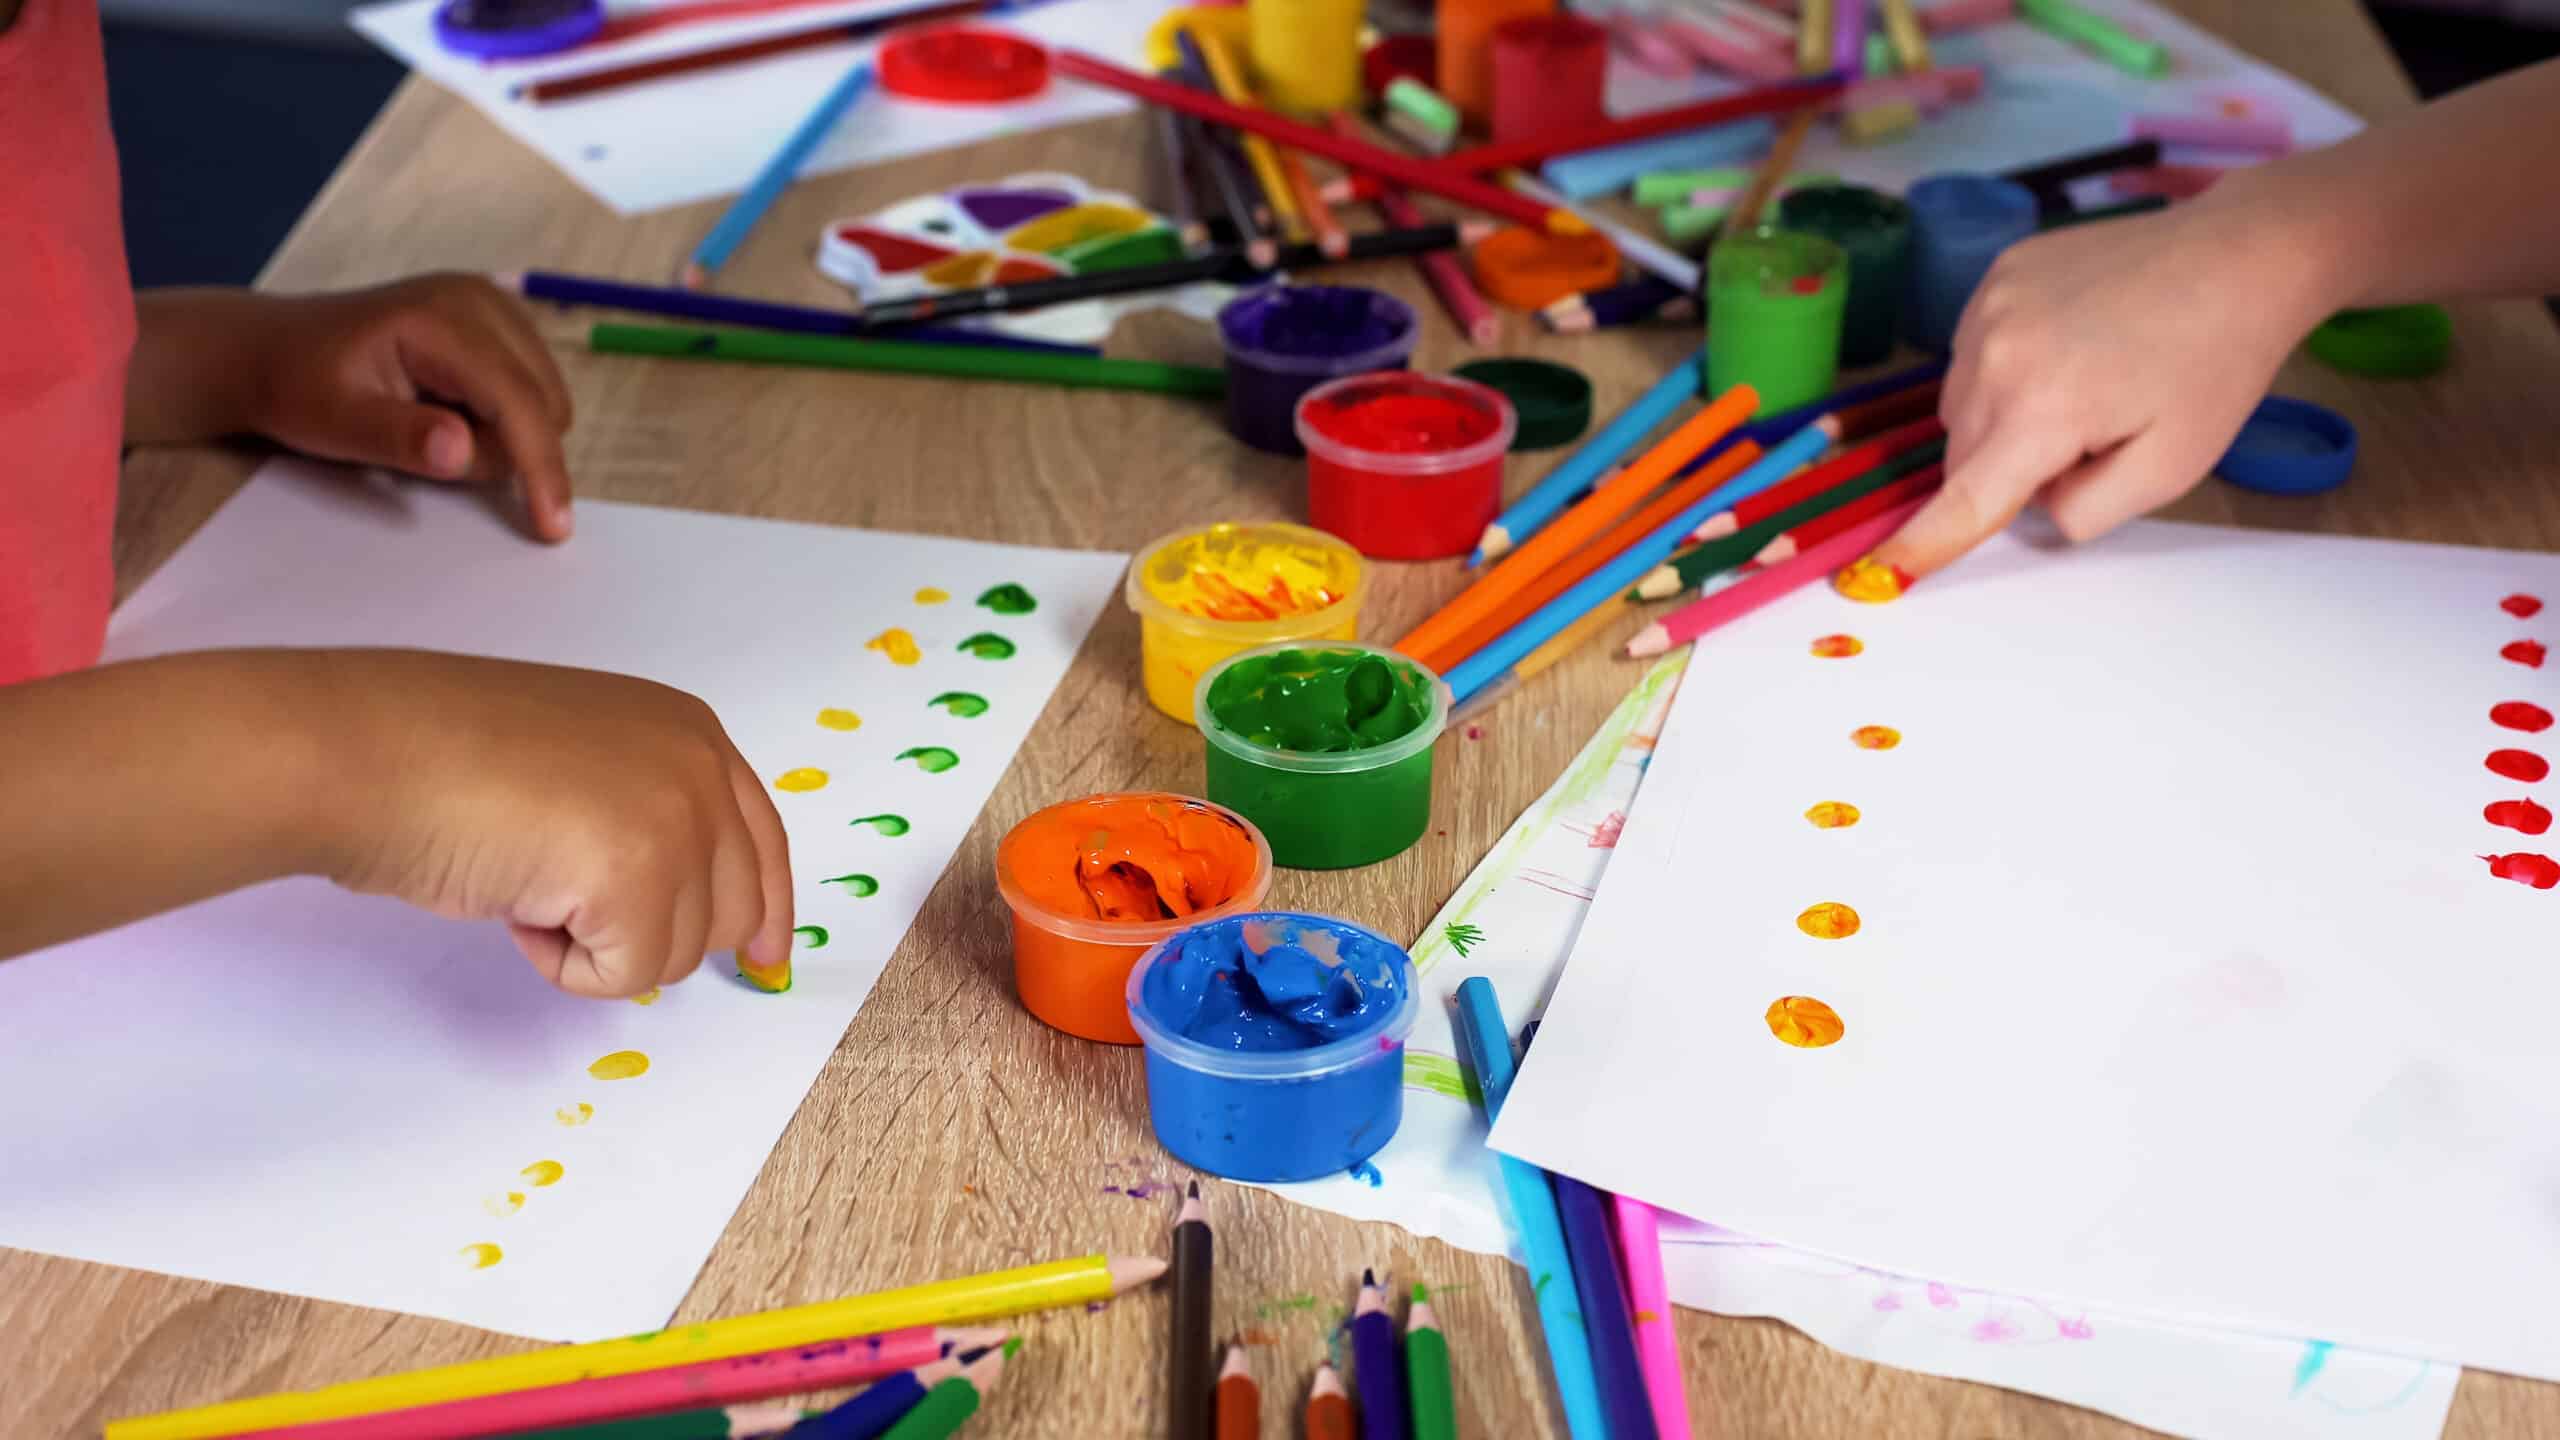 https://www.leafscore.com/wp-content/uploads/2022/02/non-toxic-eco-friendly-kids-art-supplies-scaled.jpg